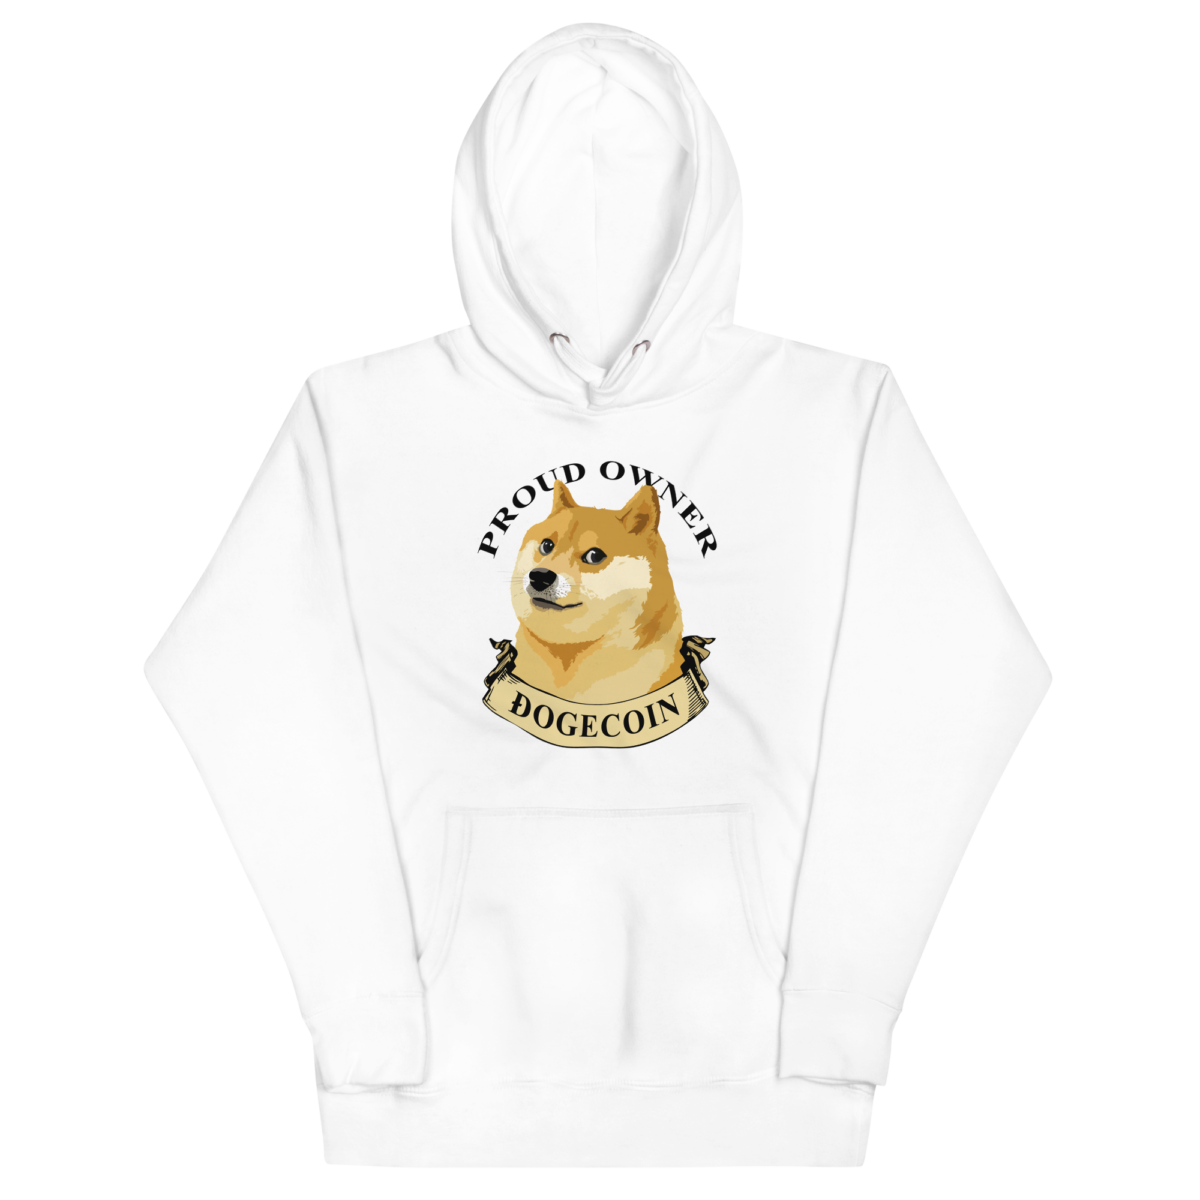 unisex premium hoodie white front 6357ab5befd3a - Proud Owner of Dogecoin Hoodie